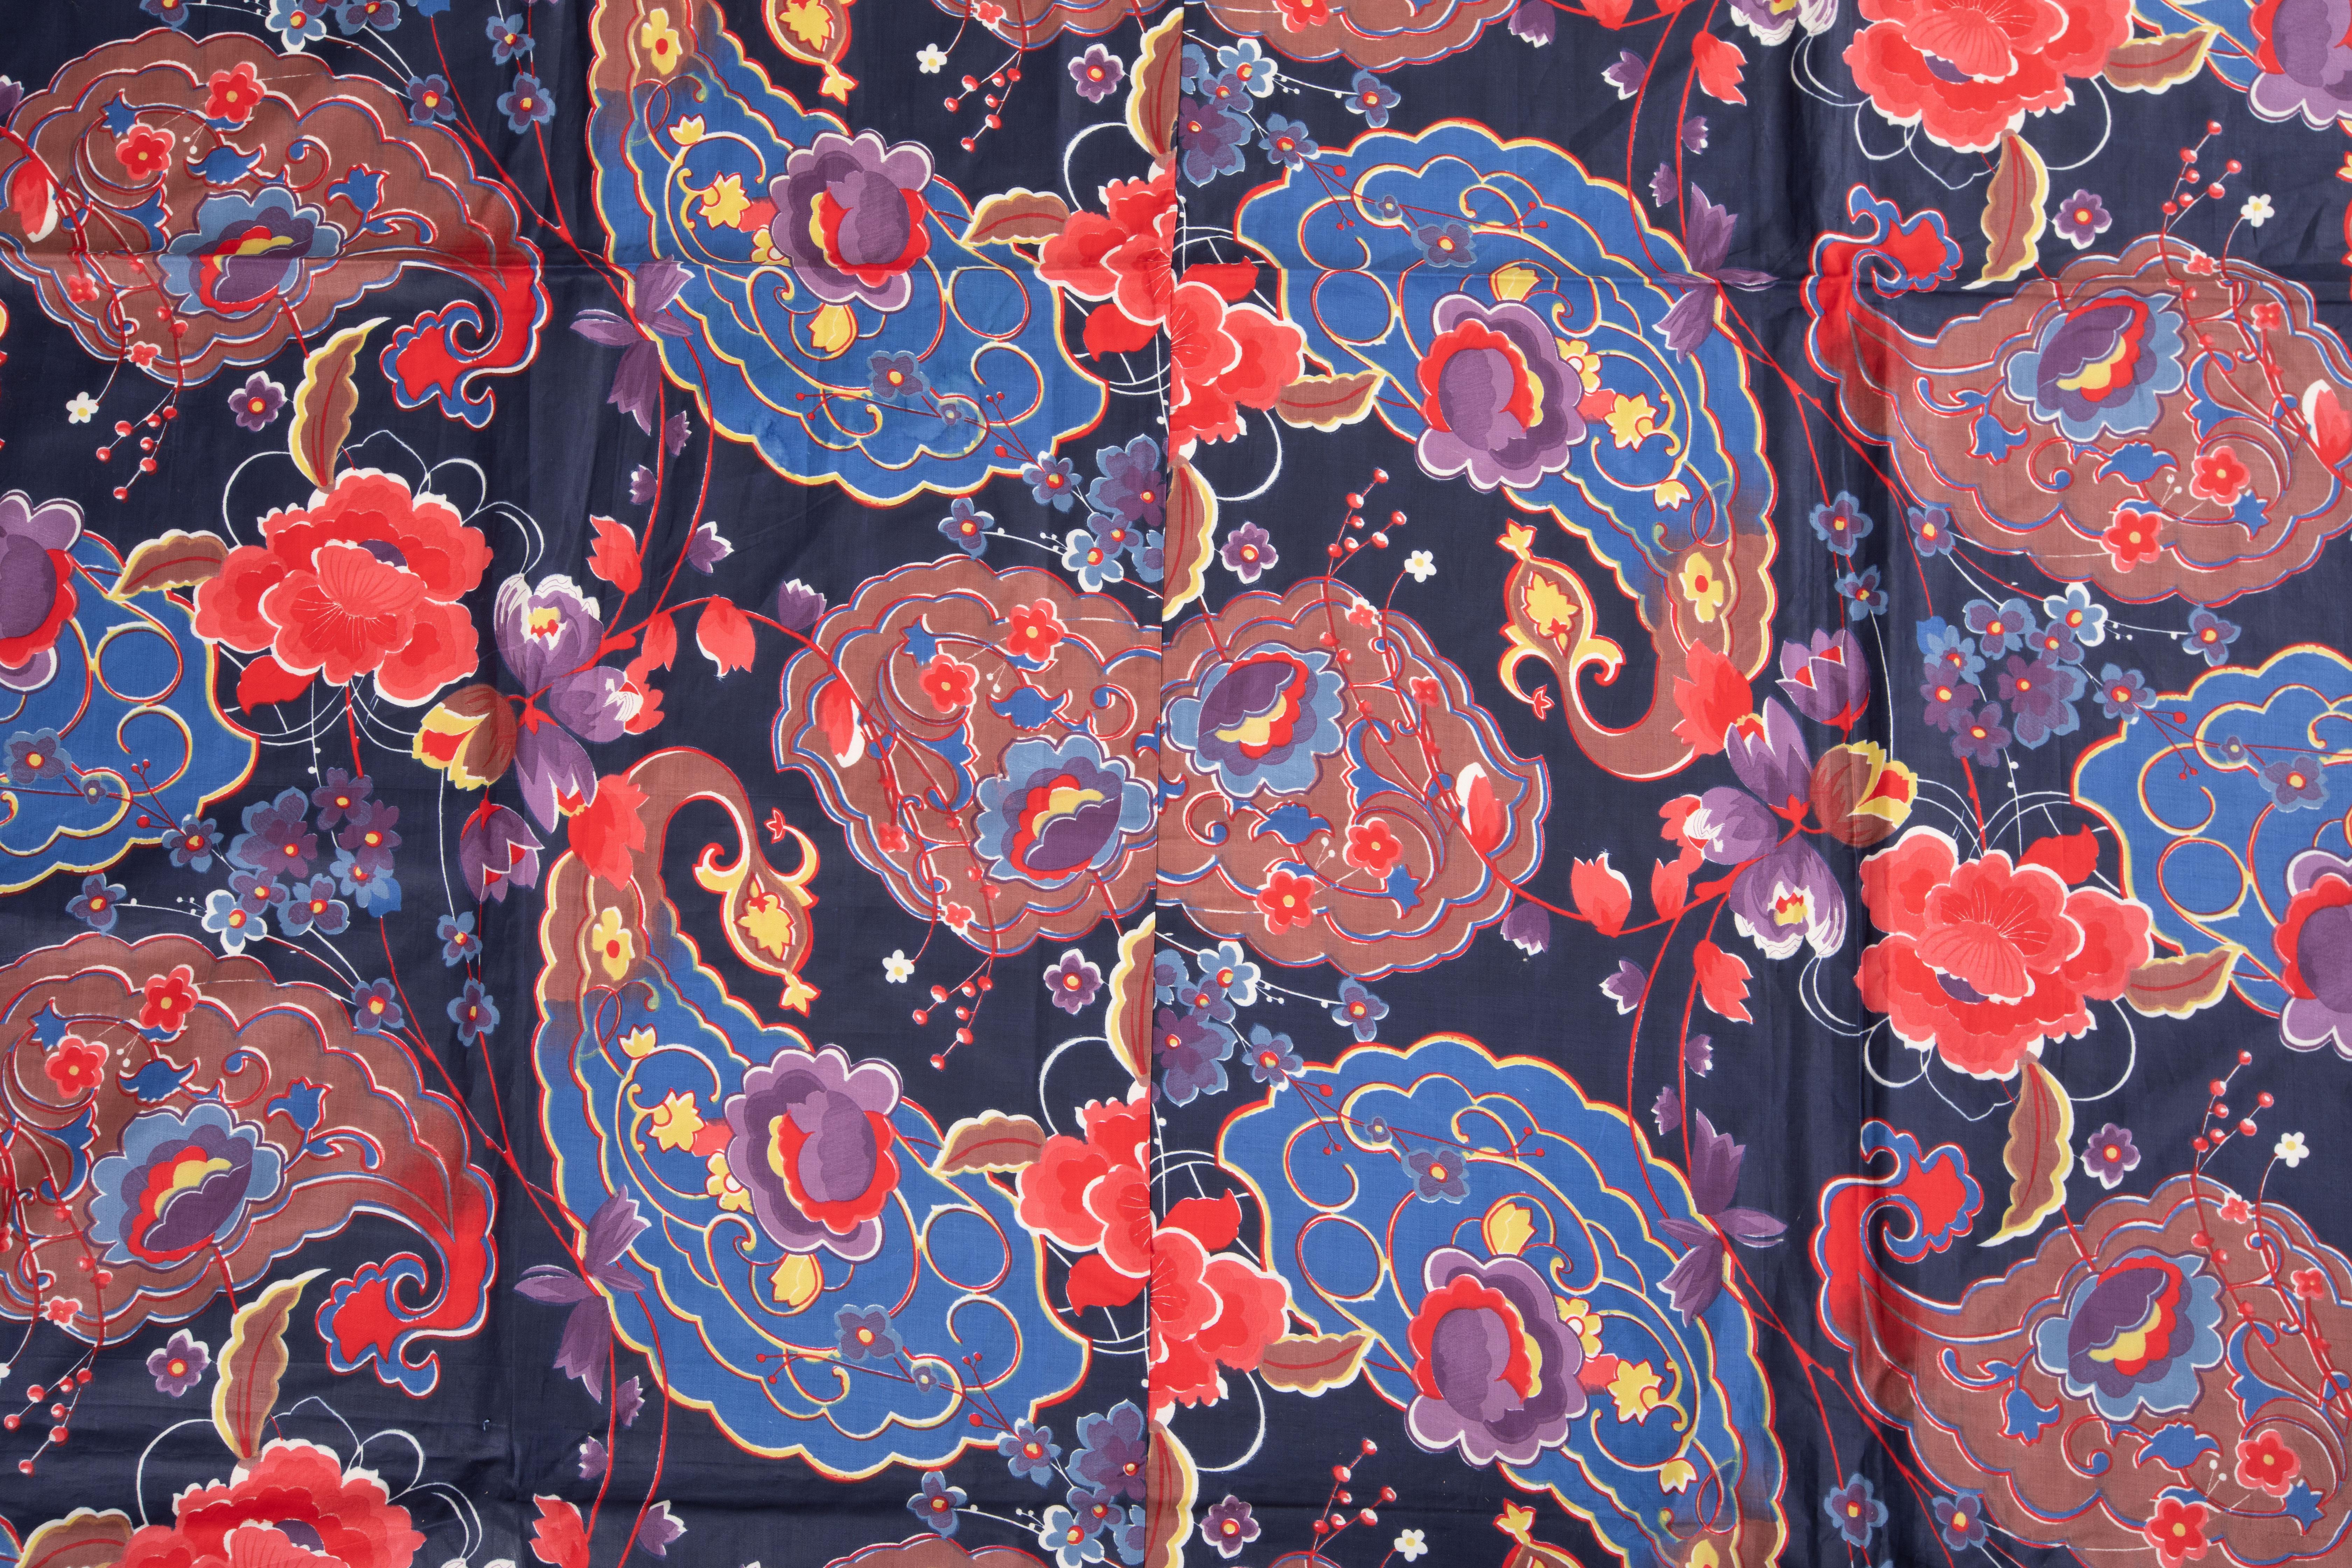 Russian Roller Printed Cotton Fabric Panel, Mid-20th Century or Earlier For Sale 5